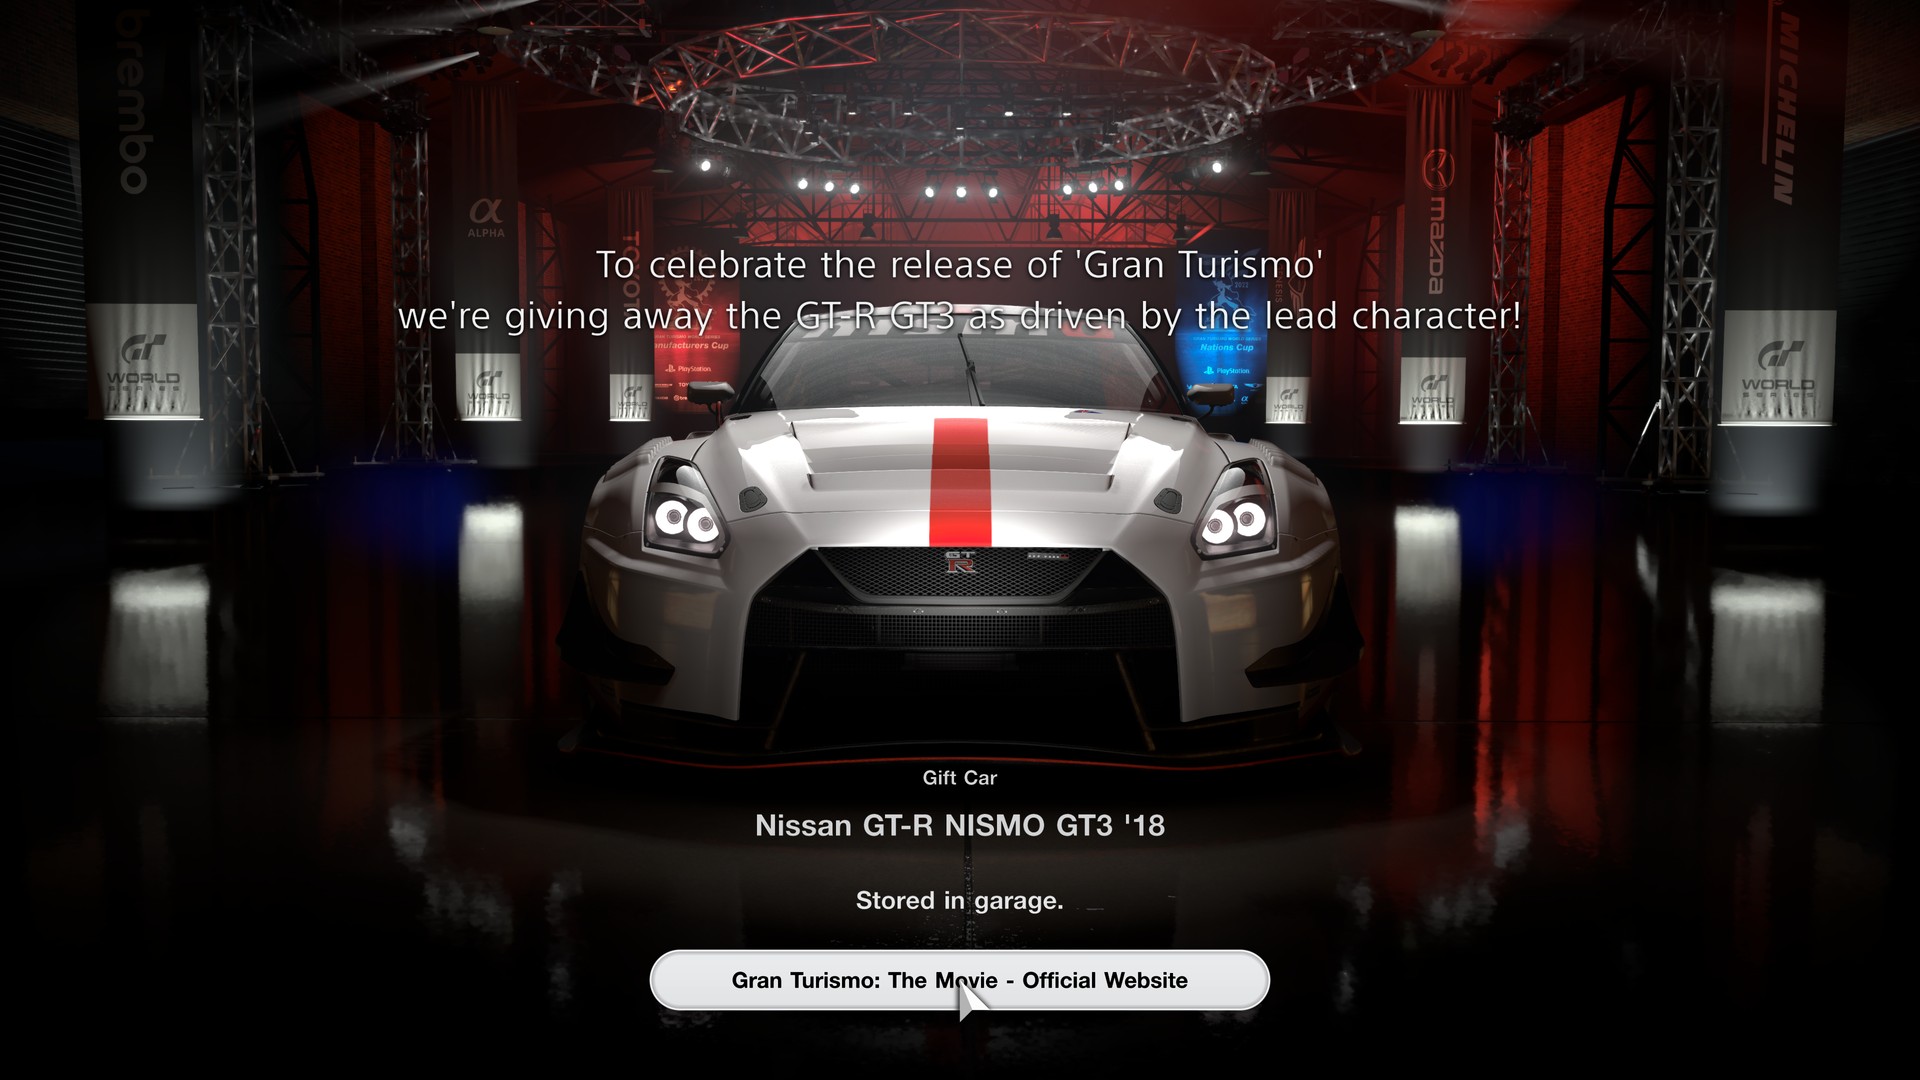 Wedding cars and tracks from previous games found in Gran Turismo